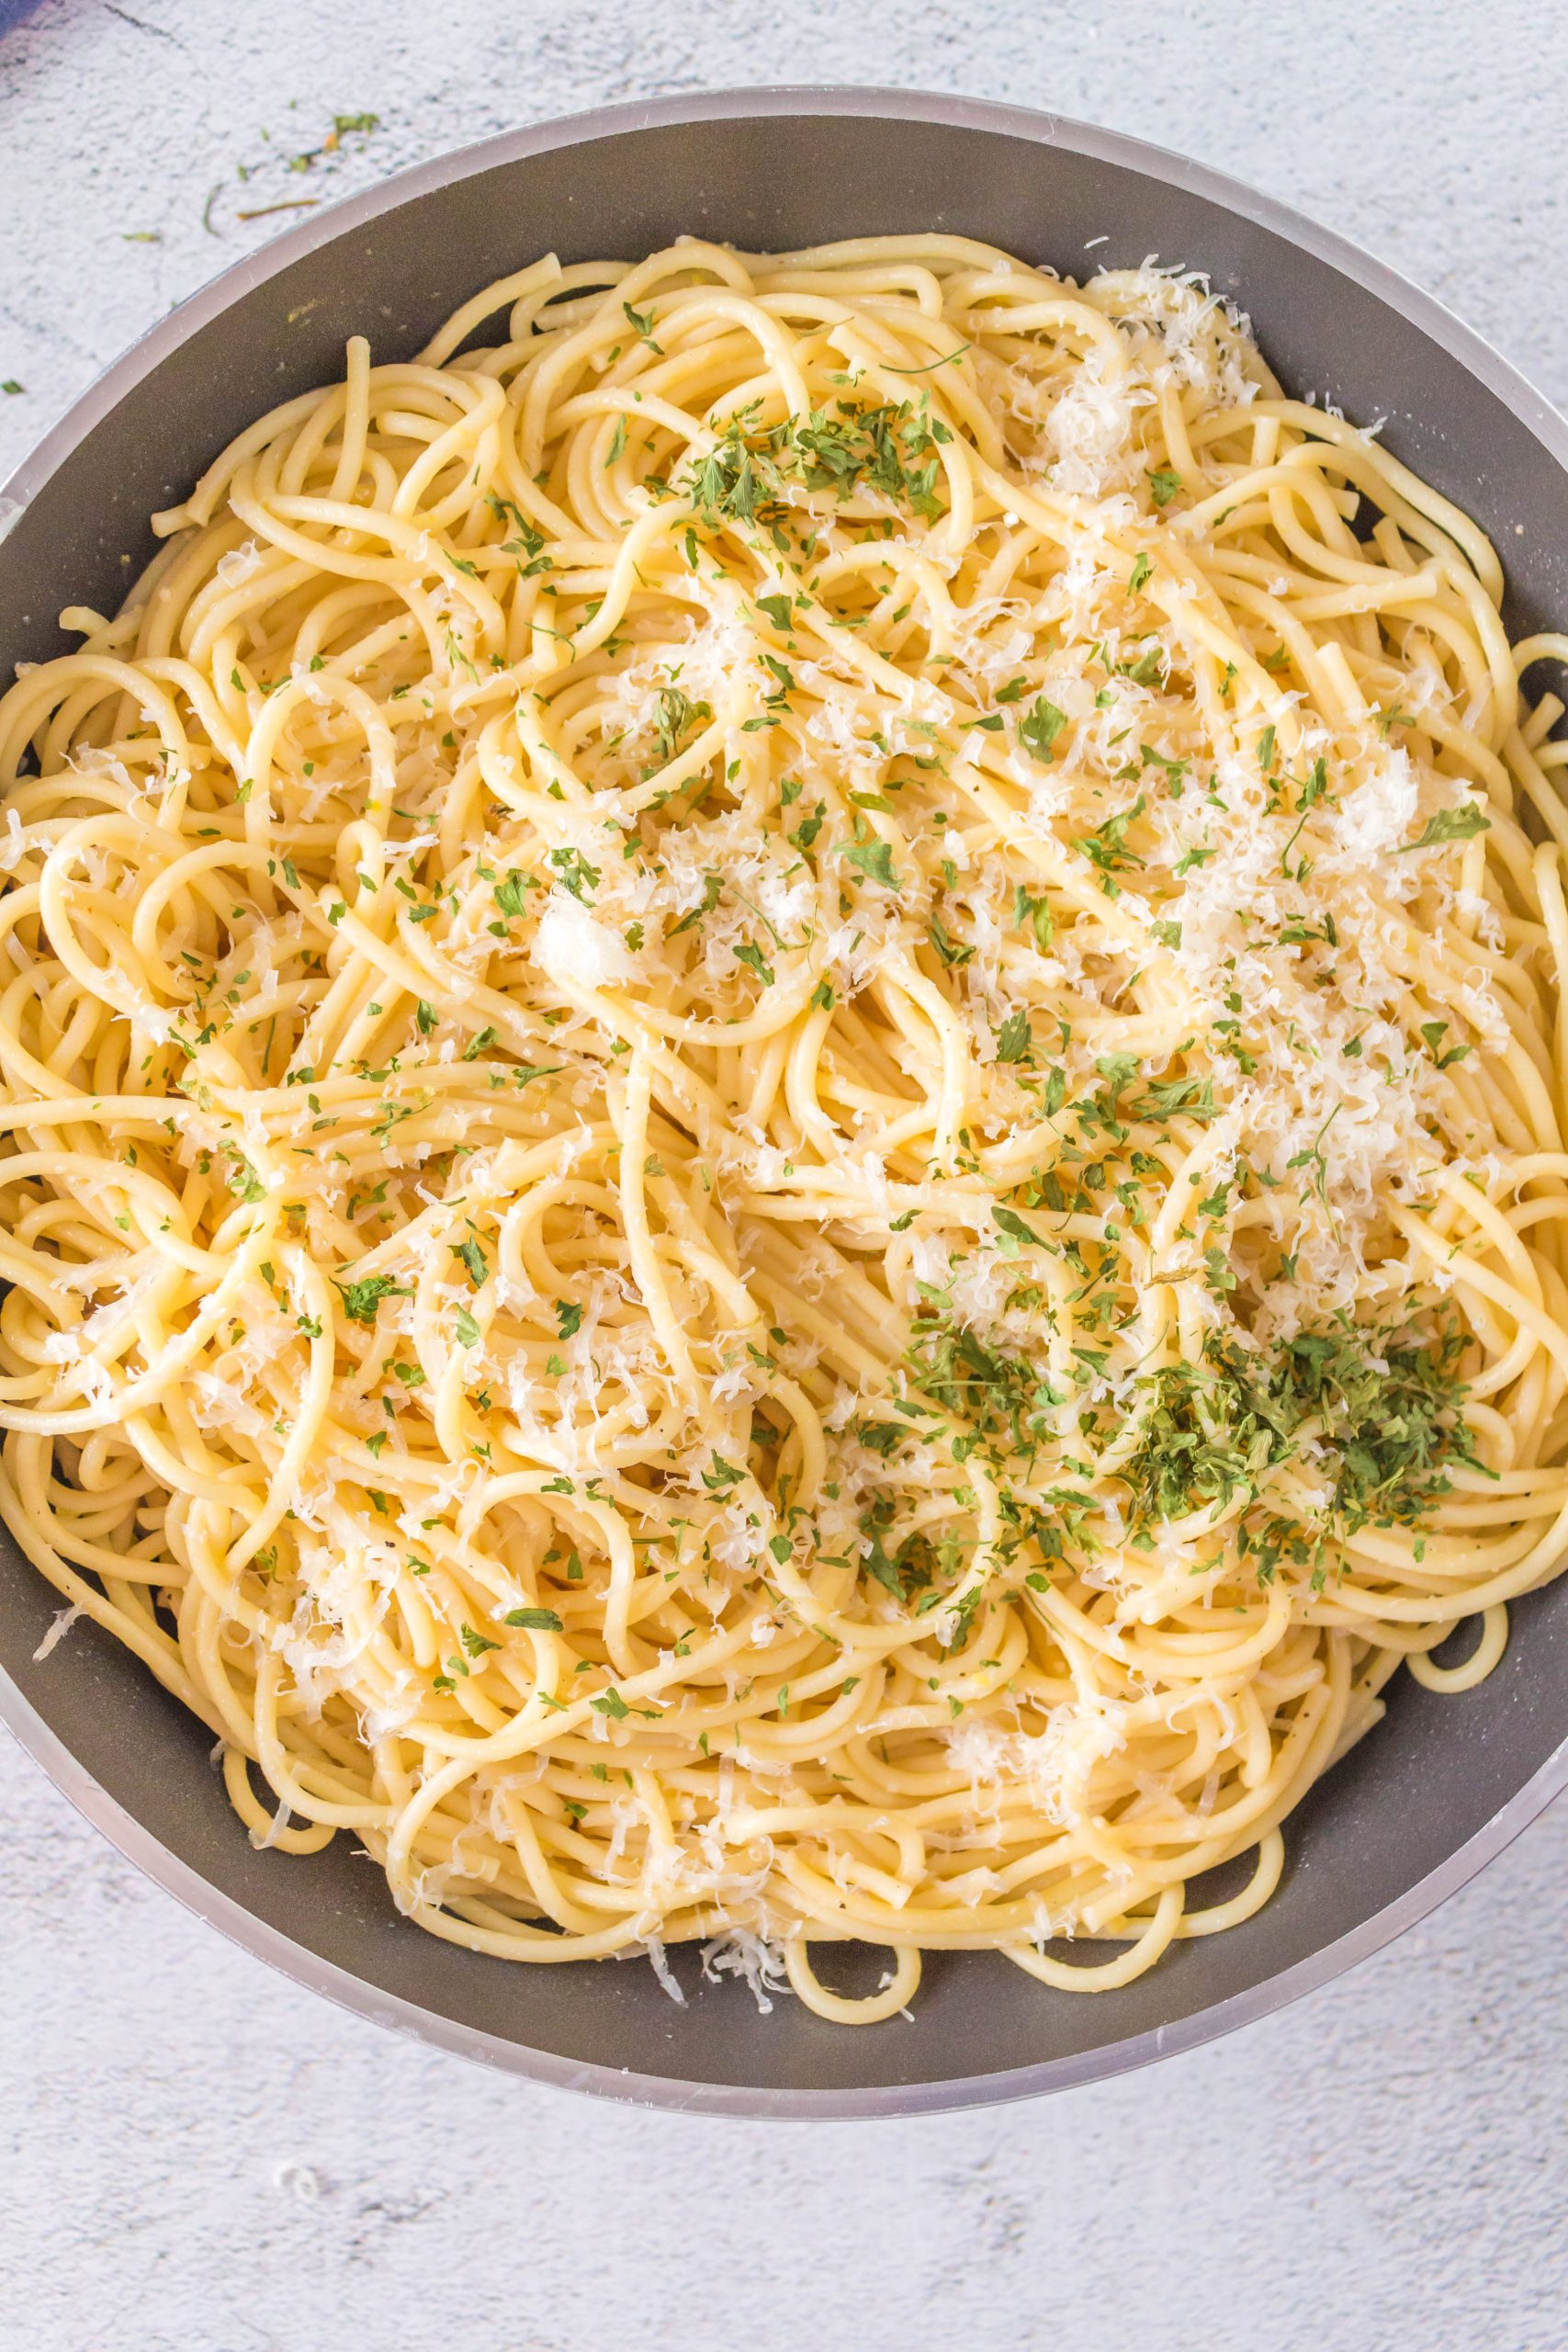 A fast and easy bowl of spaghetti with parmesan cheese and parsley.